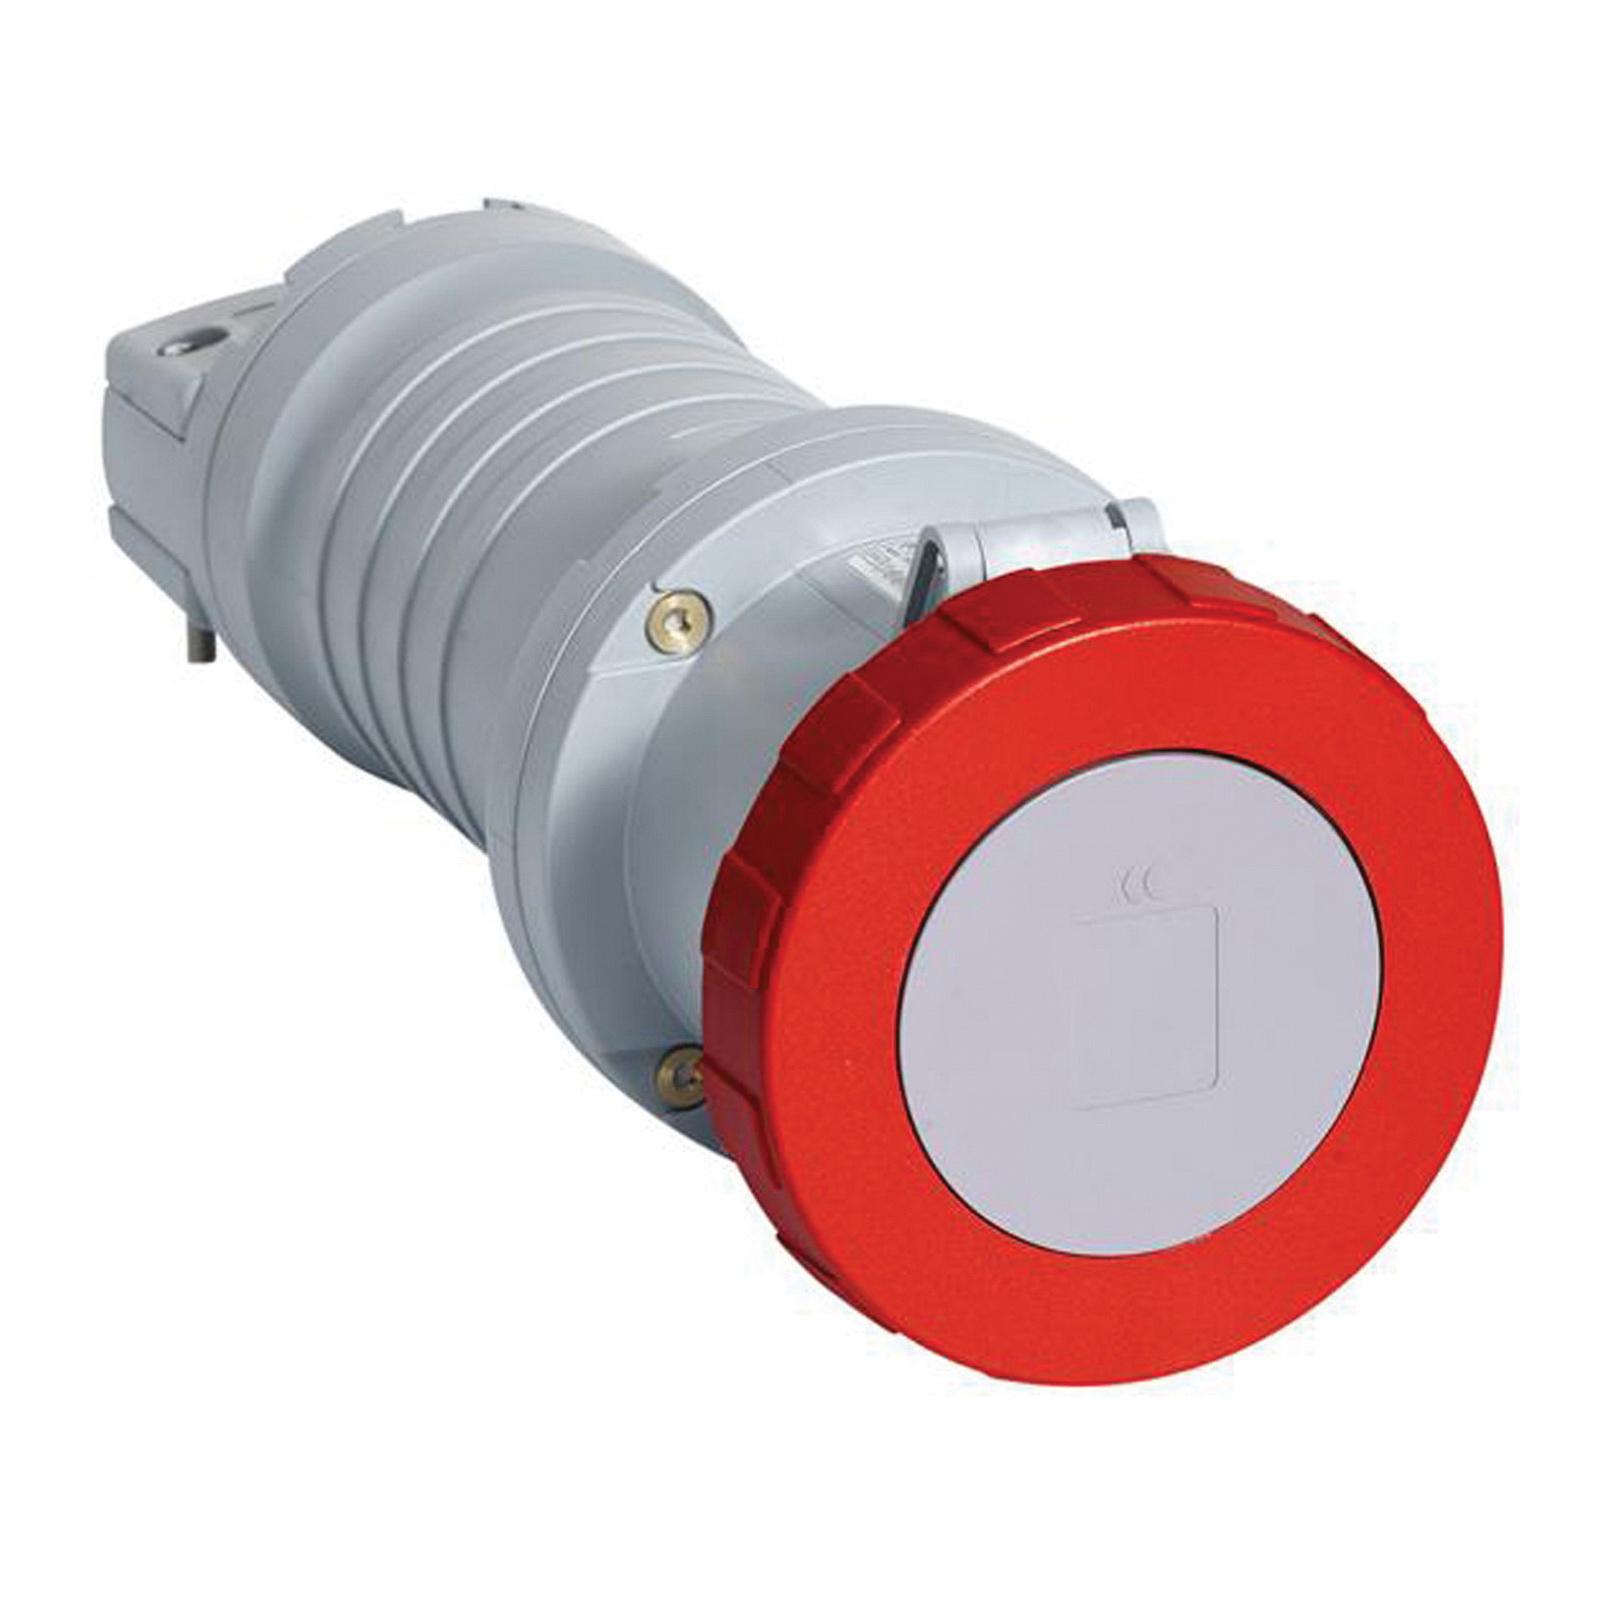 ABB ABB460C7W Pin and Sleeve Connector